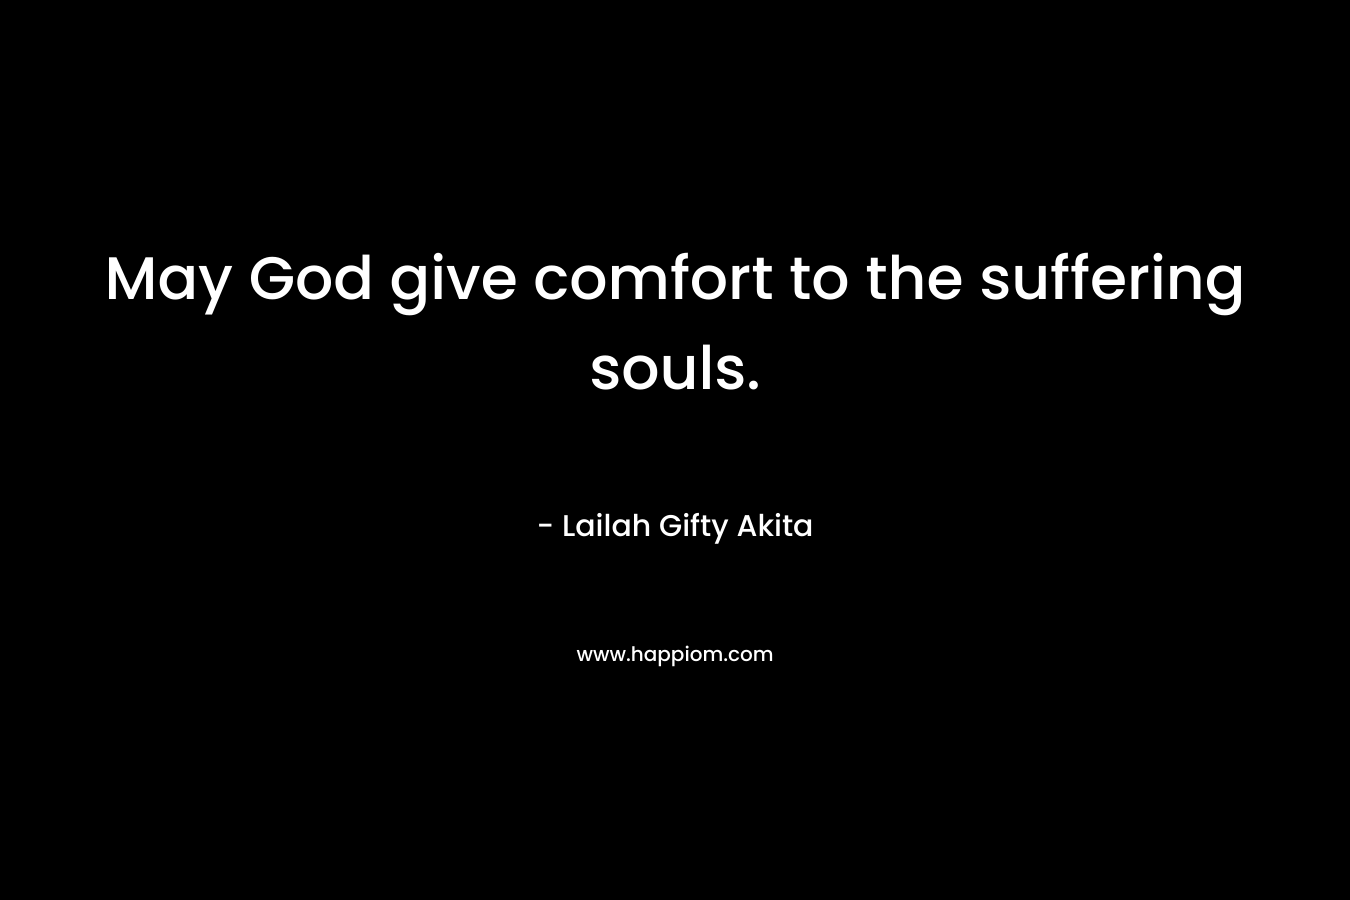 May God give comfort to the suffering souls.